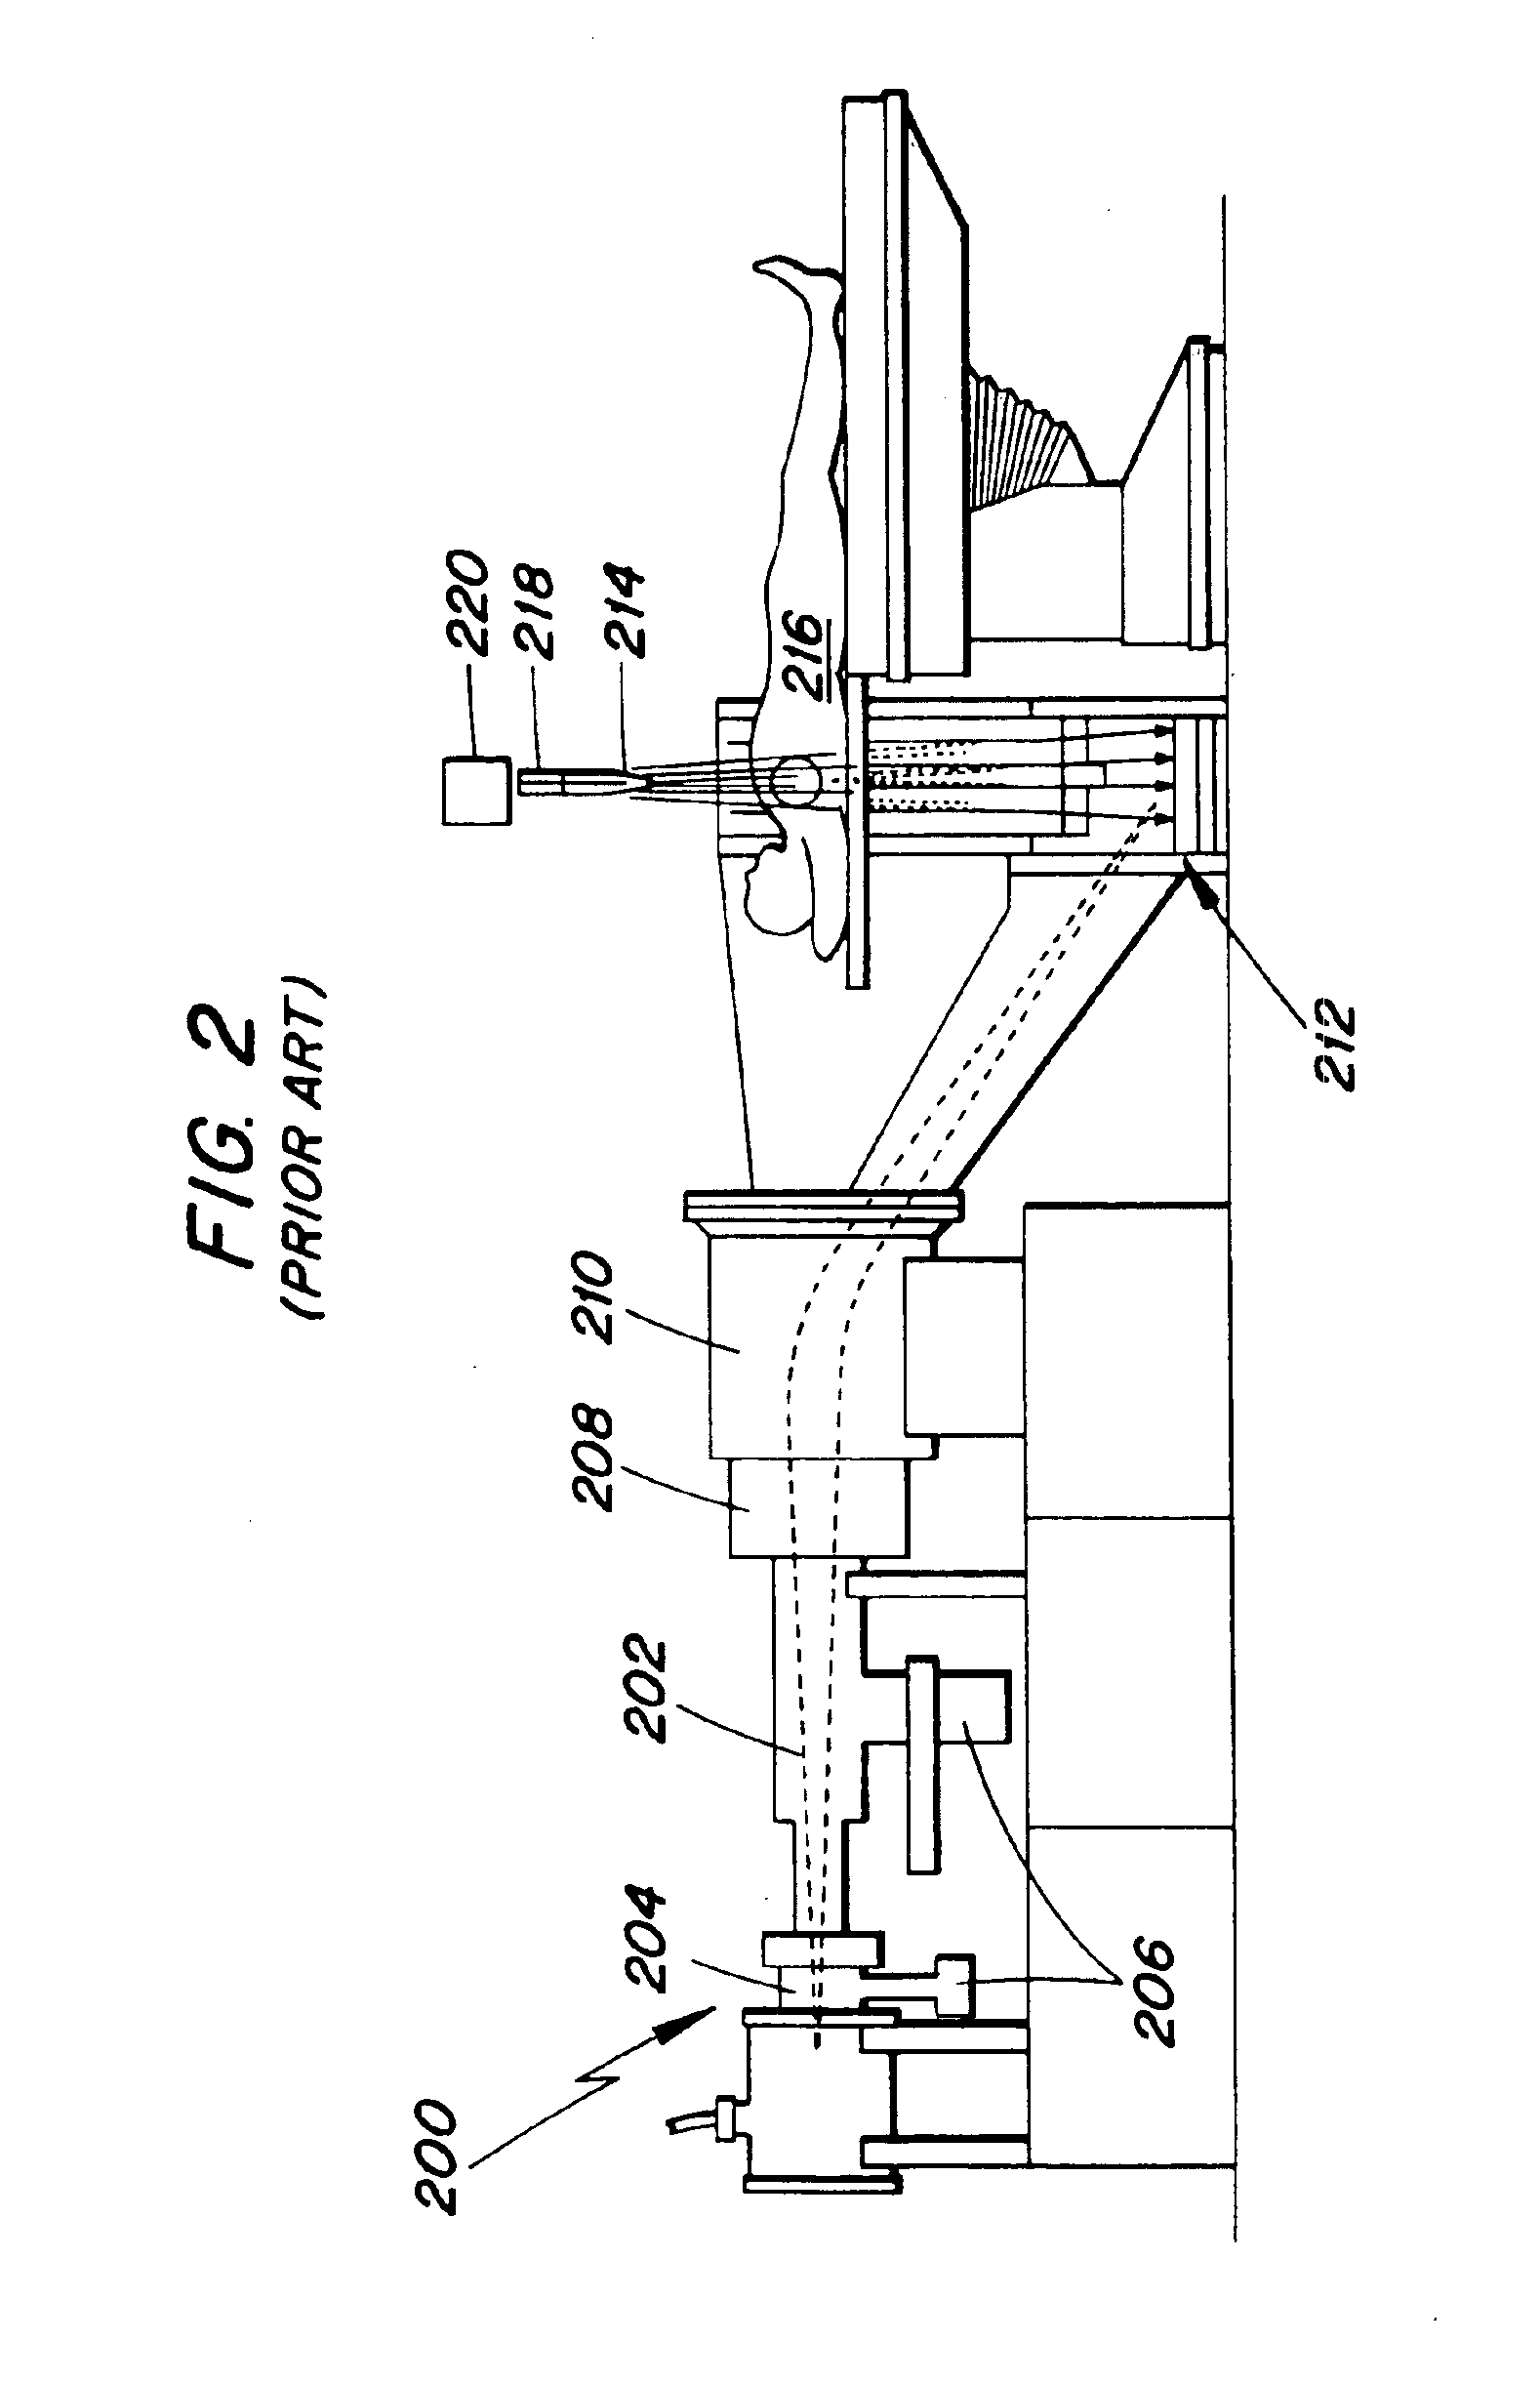 Large-area individually addressable multi-beam x-ray system and method of forming same